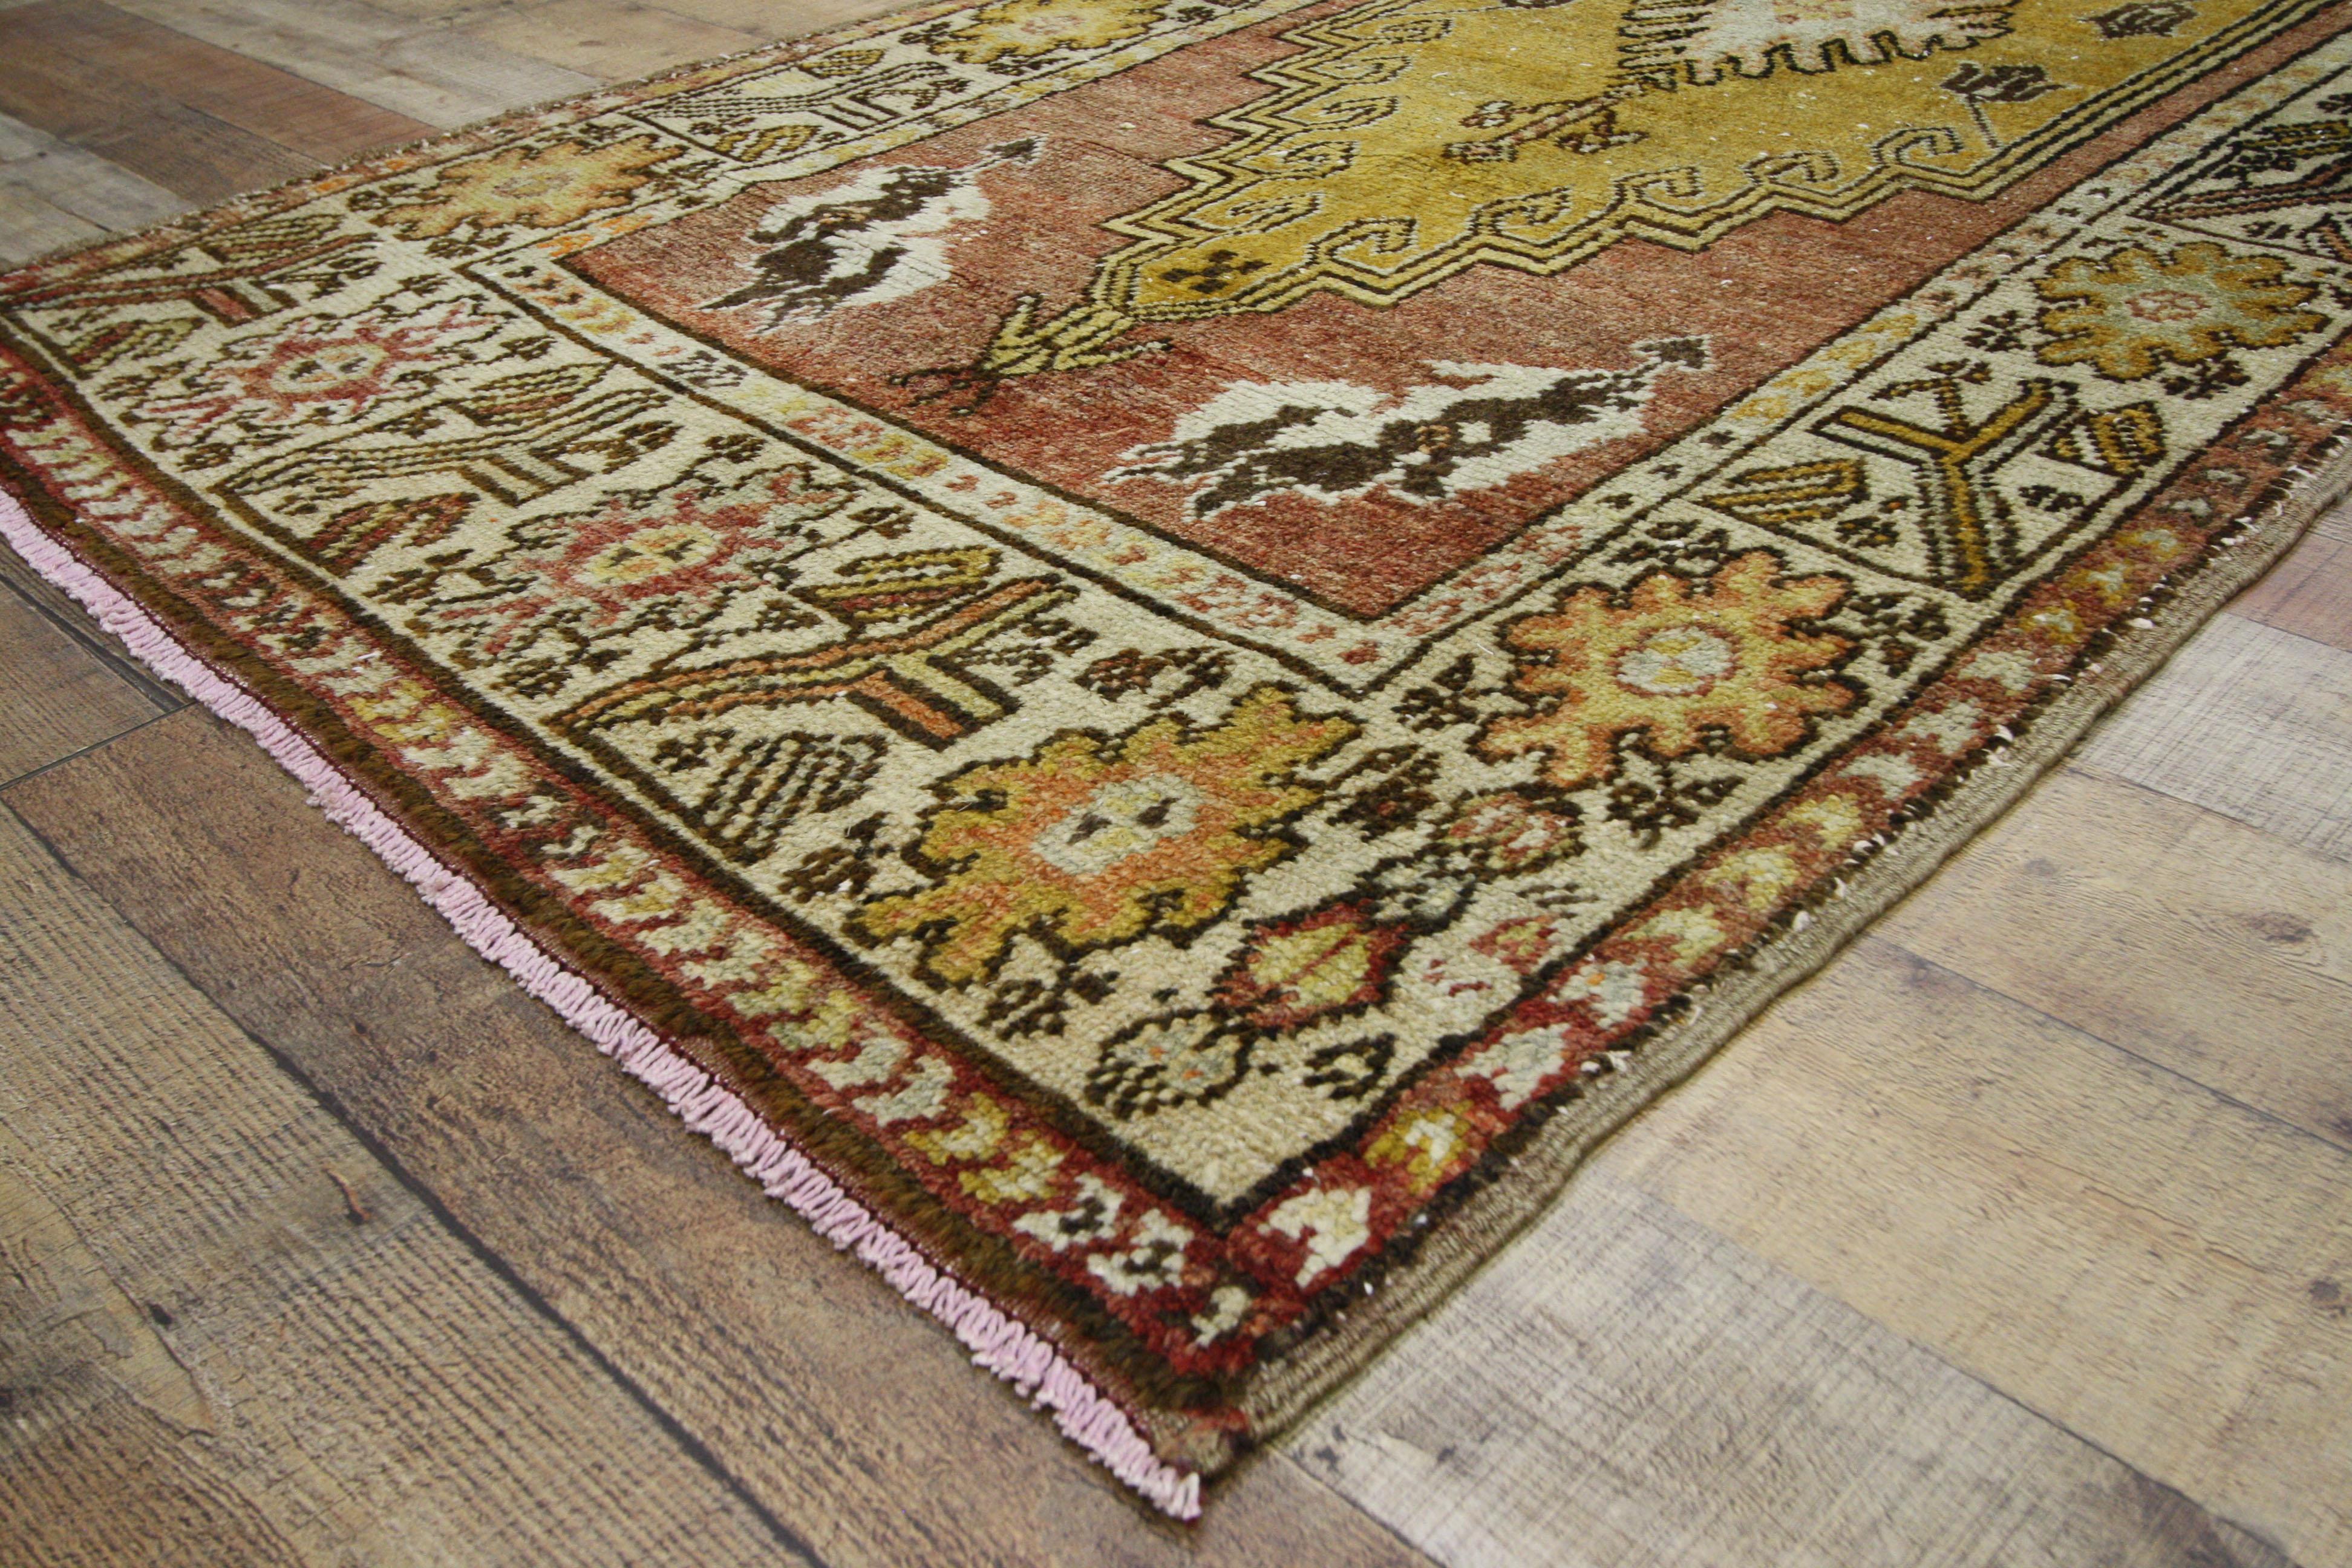 52411, vintage Turkish Oushak runner, tribal style hallway runner. This hand knotted wool vintage Turkish Oushak runner features two large stepped hexagonal medallions with anchor pendants spread across an abrashed field. Each medallion contains